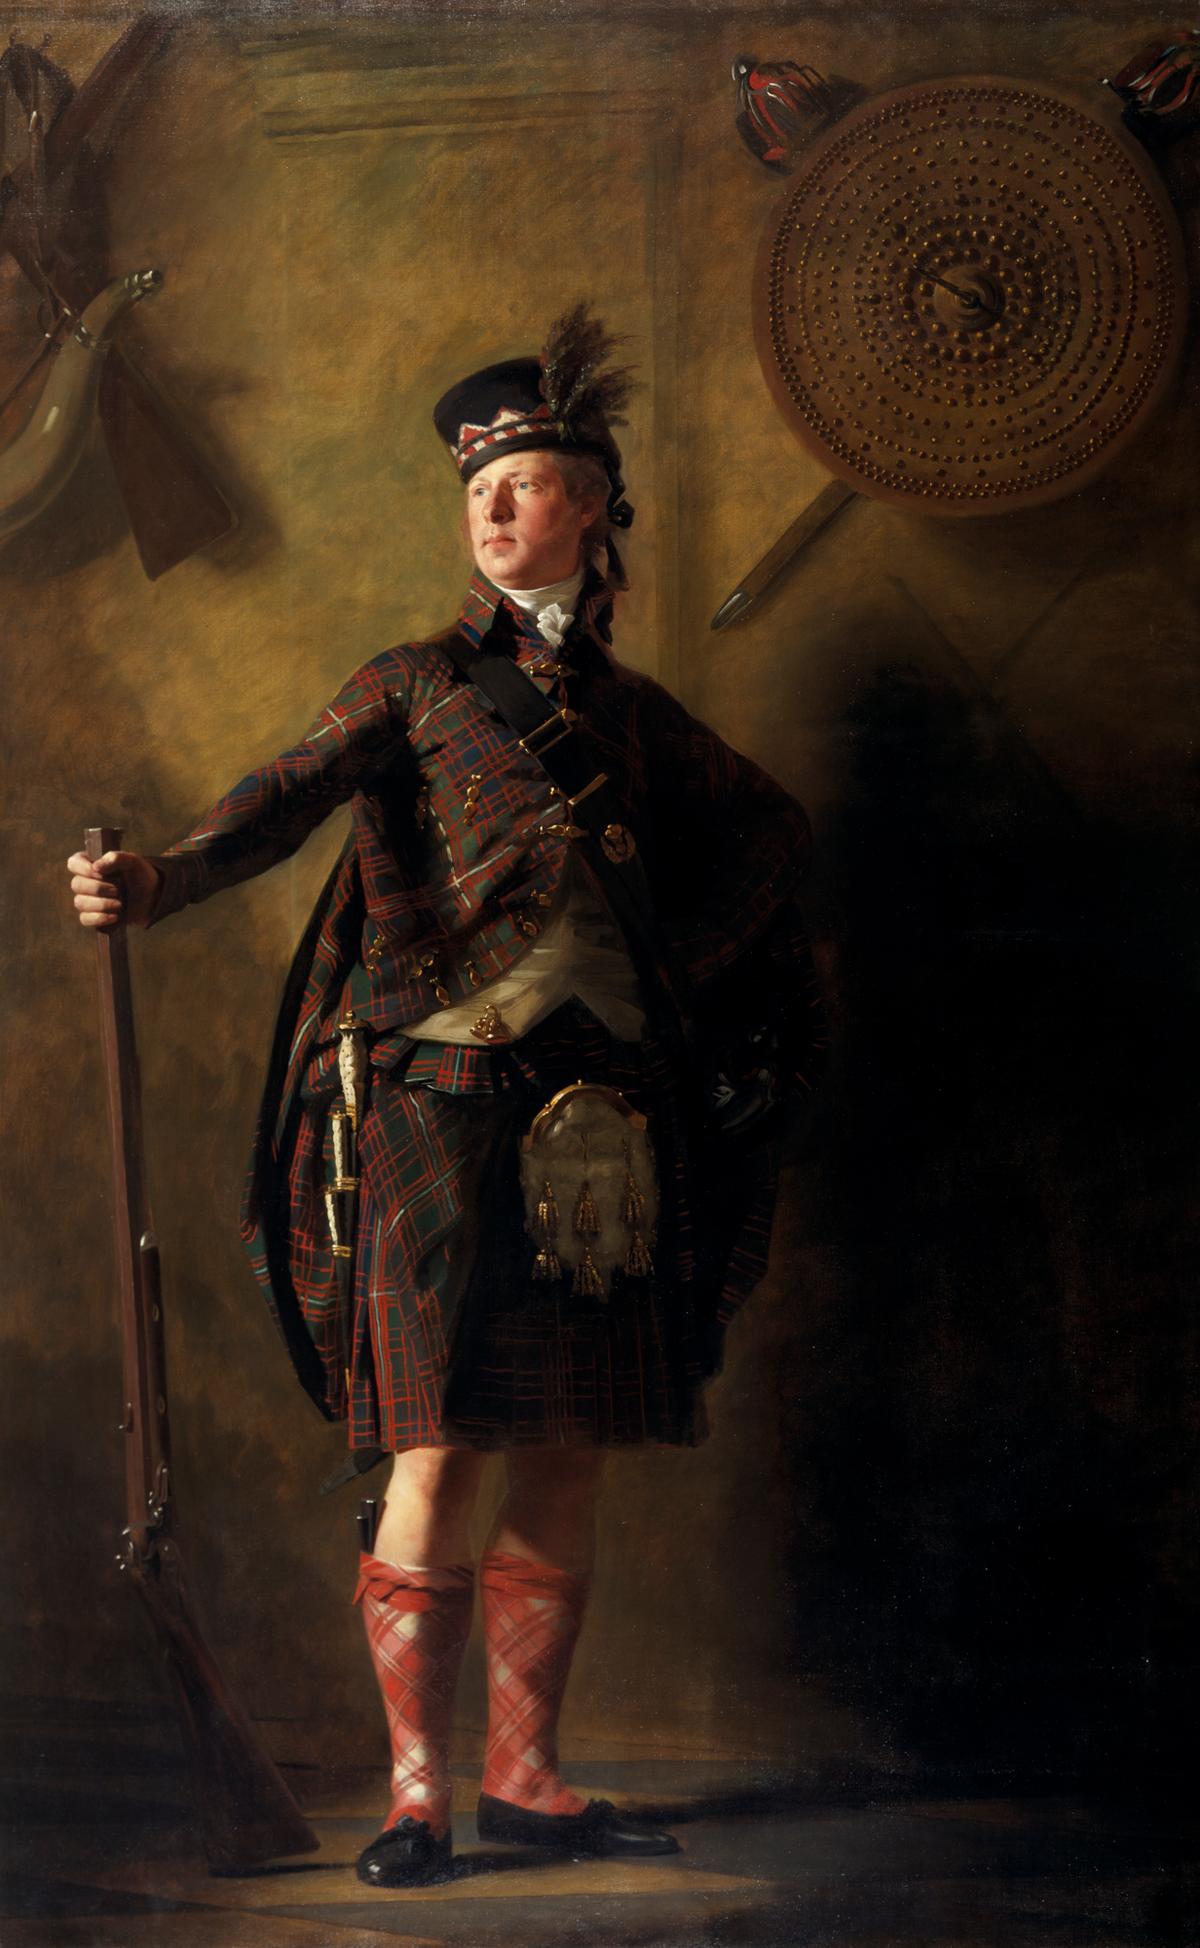 "Colonel Alastair Ranaldson Macdonell, 15th Chief of Glengarry," 1812, by Sir Henry Raeburn. (Courtesy of the Frick Collection)